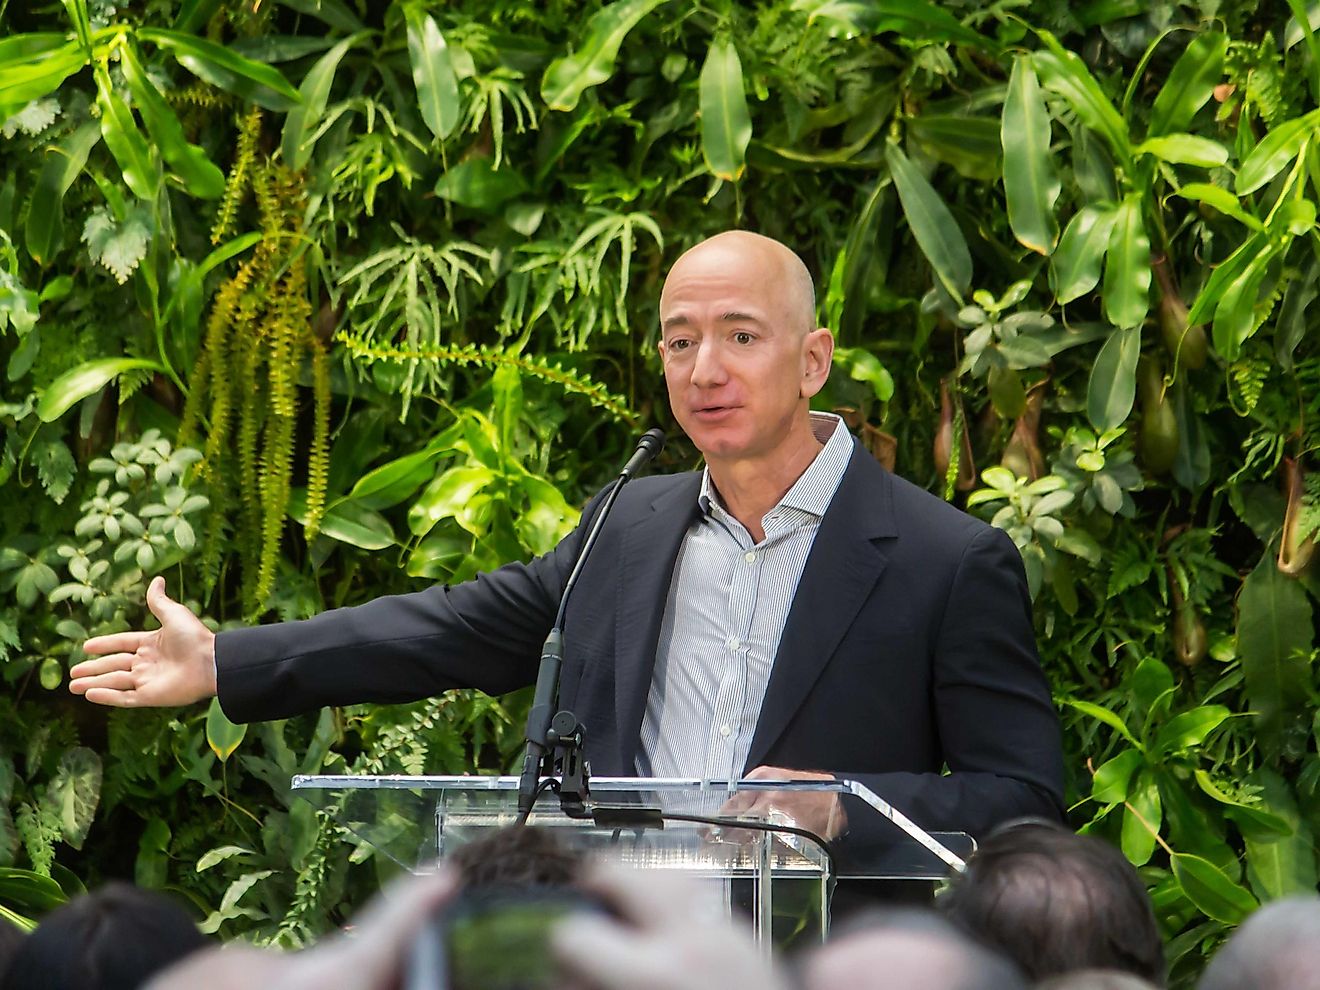 Jeff Bezos has a staggering net worth of $123.9 billion thanks to the success of Amazon. Image credit: wikimedia.org